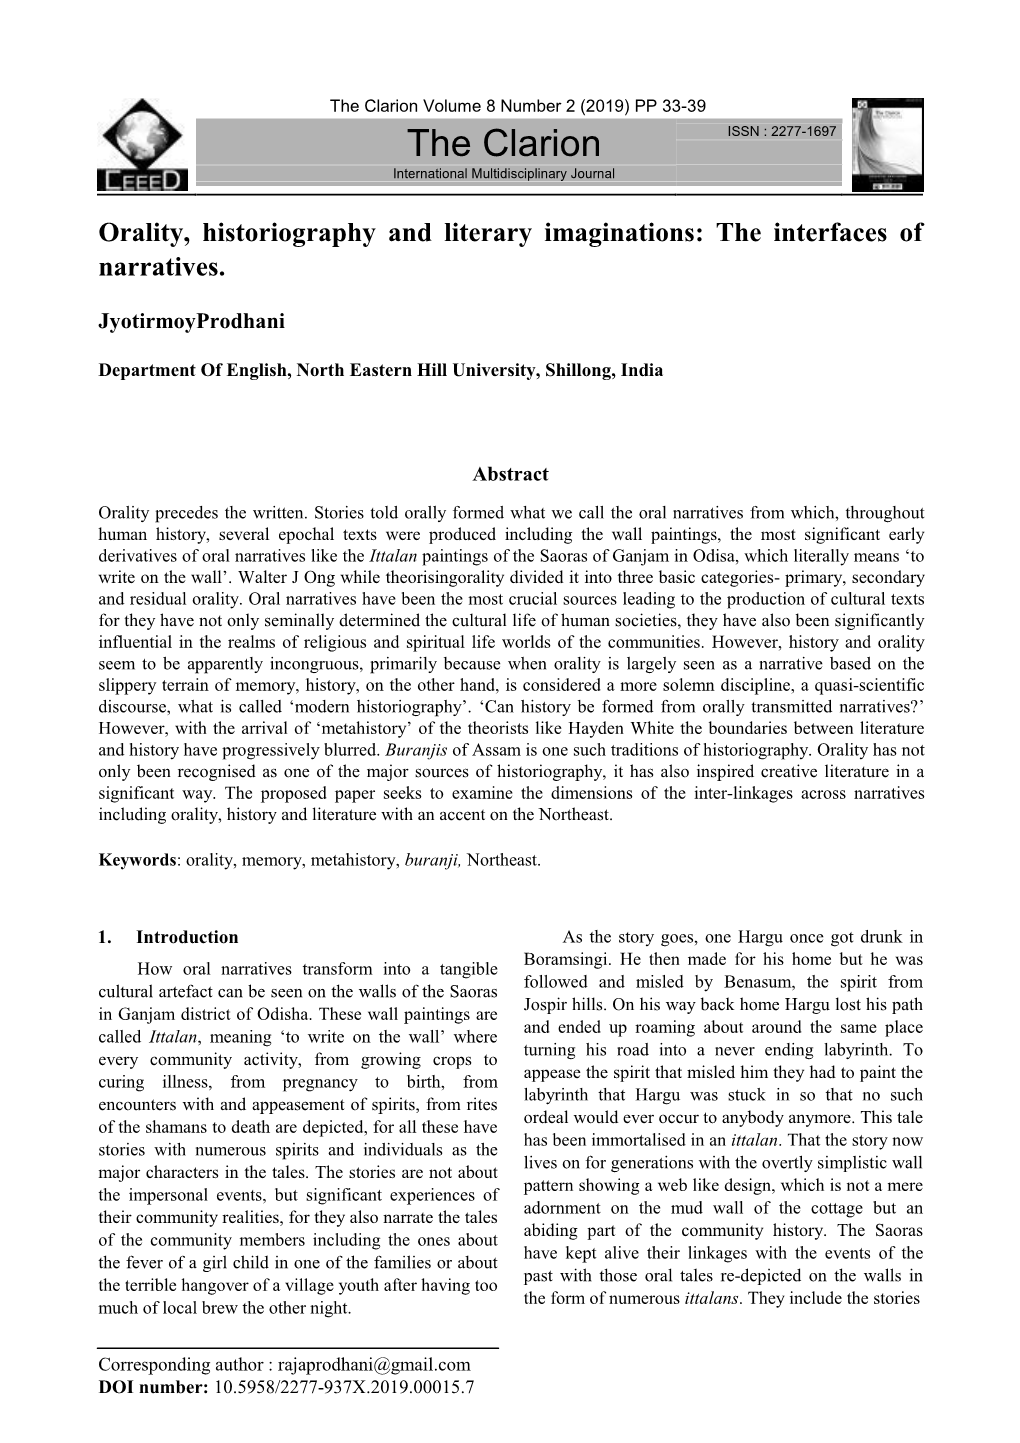 Orality, Historiography and Literary Imaginations: the Interfaces of Narratives